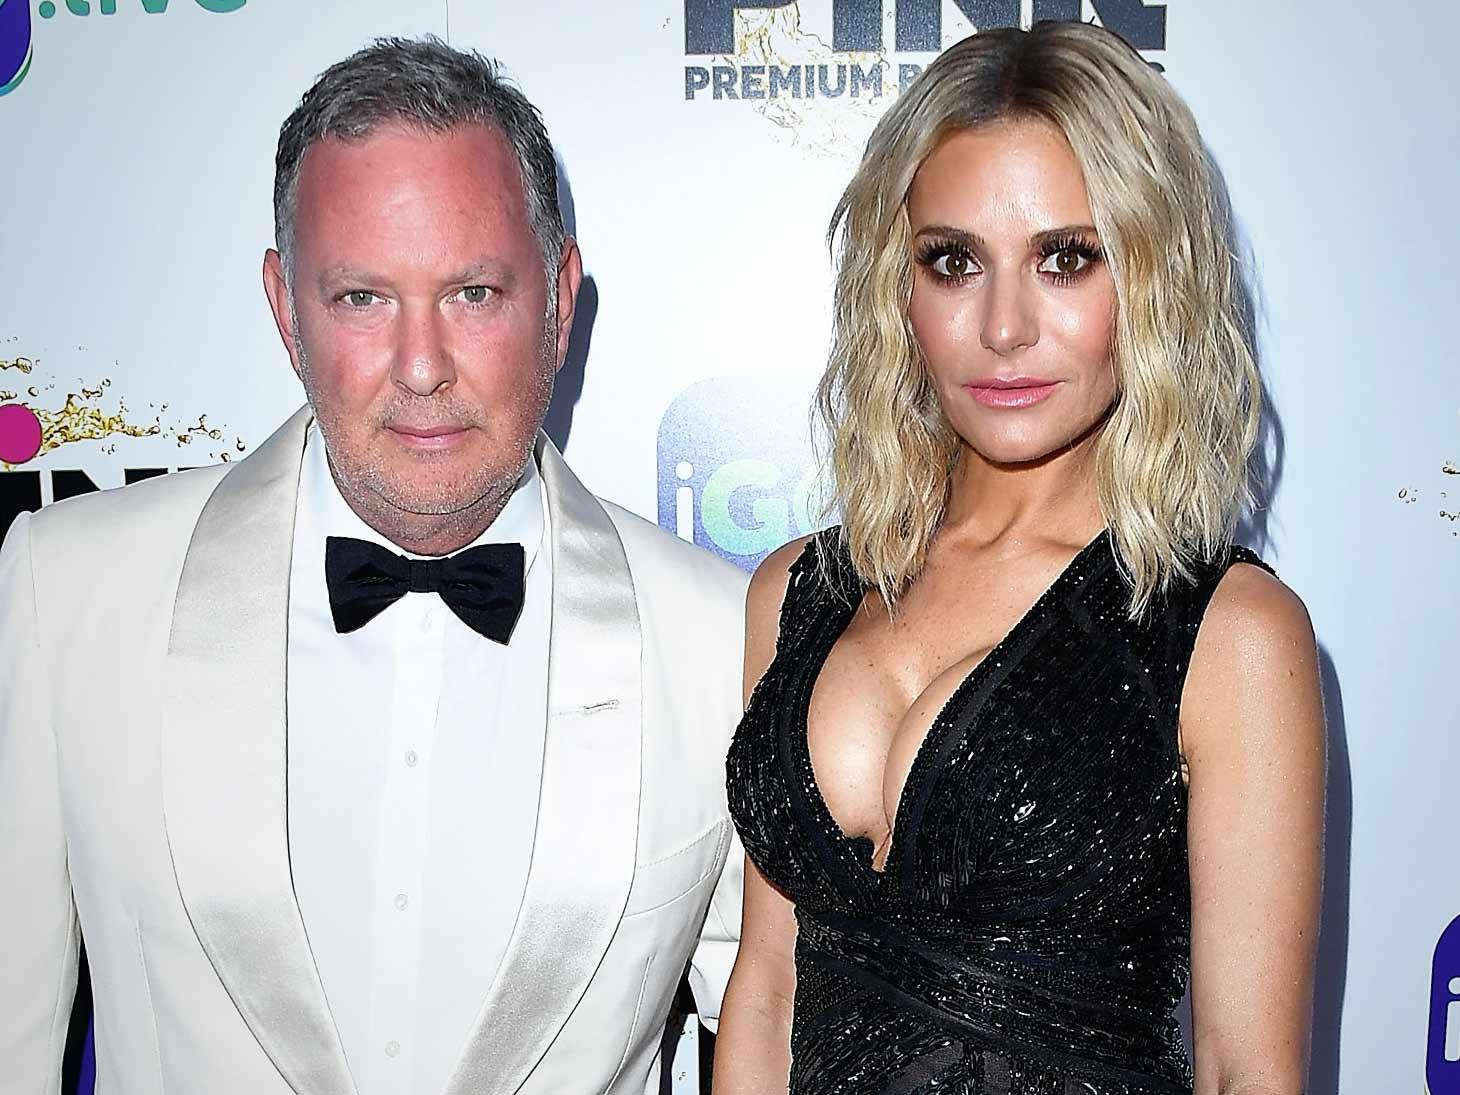 ‘RHOBH’ Star Dorit Kemsley’s Husband’s Financial Troubles Worsen, Assets to Be Seized Over $1.2 Million Unpaid Loan